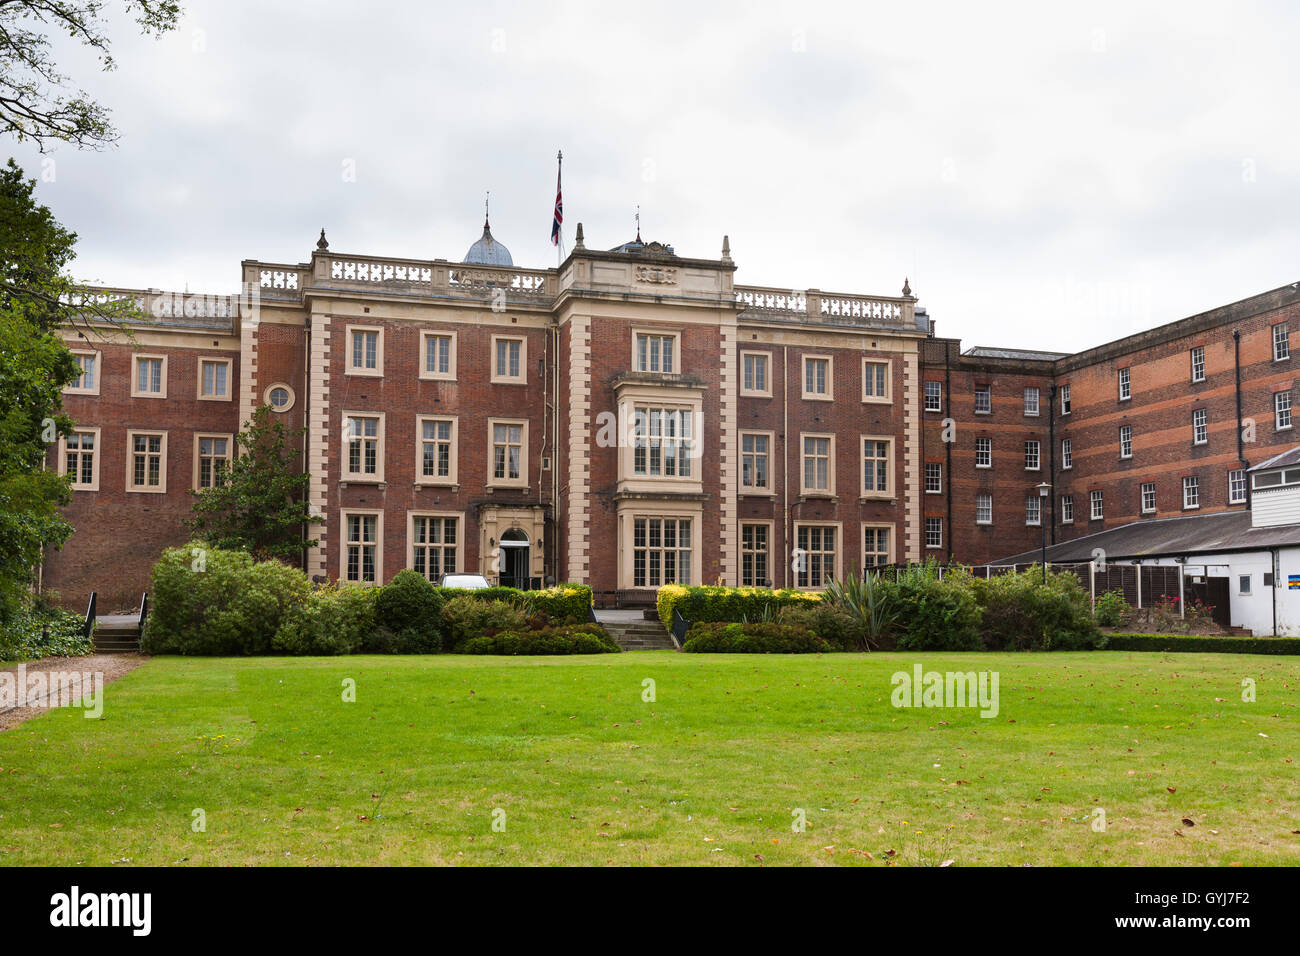 Rear aspect / back of Kneller Hall, Whitton, Twickenham, home of Royal Military School of Music, & the Museum of Army Music. UK Stock Photo